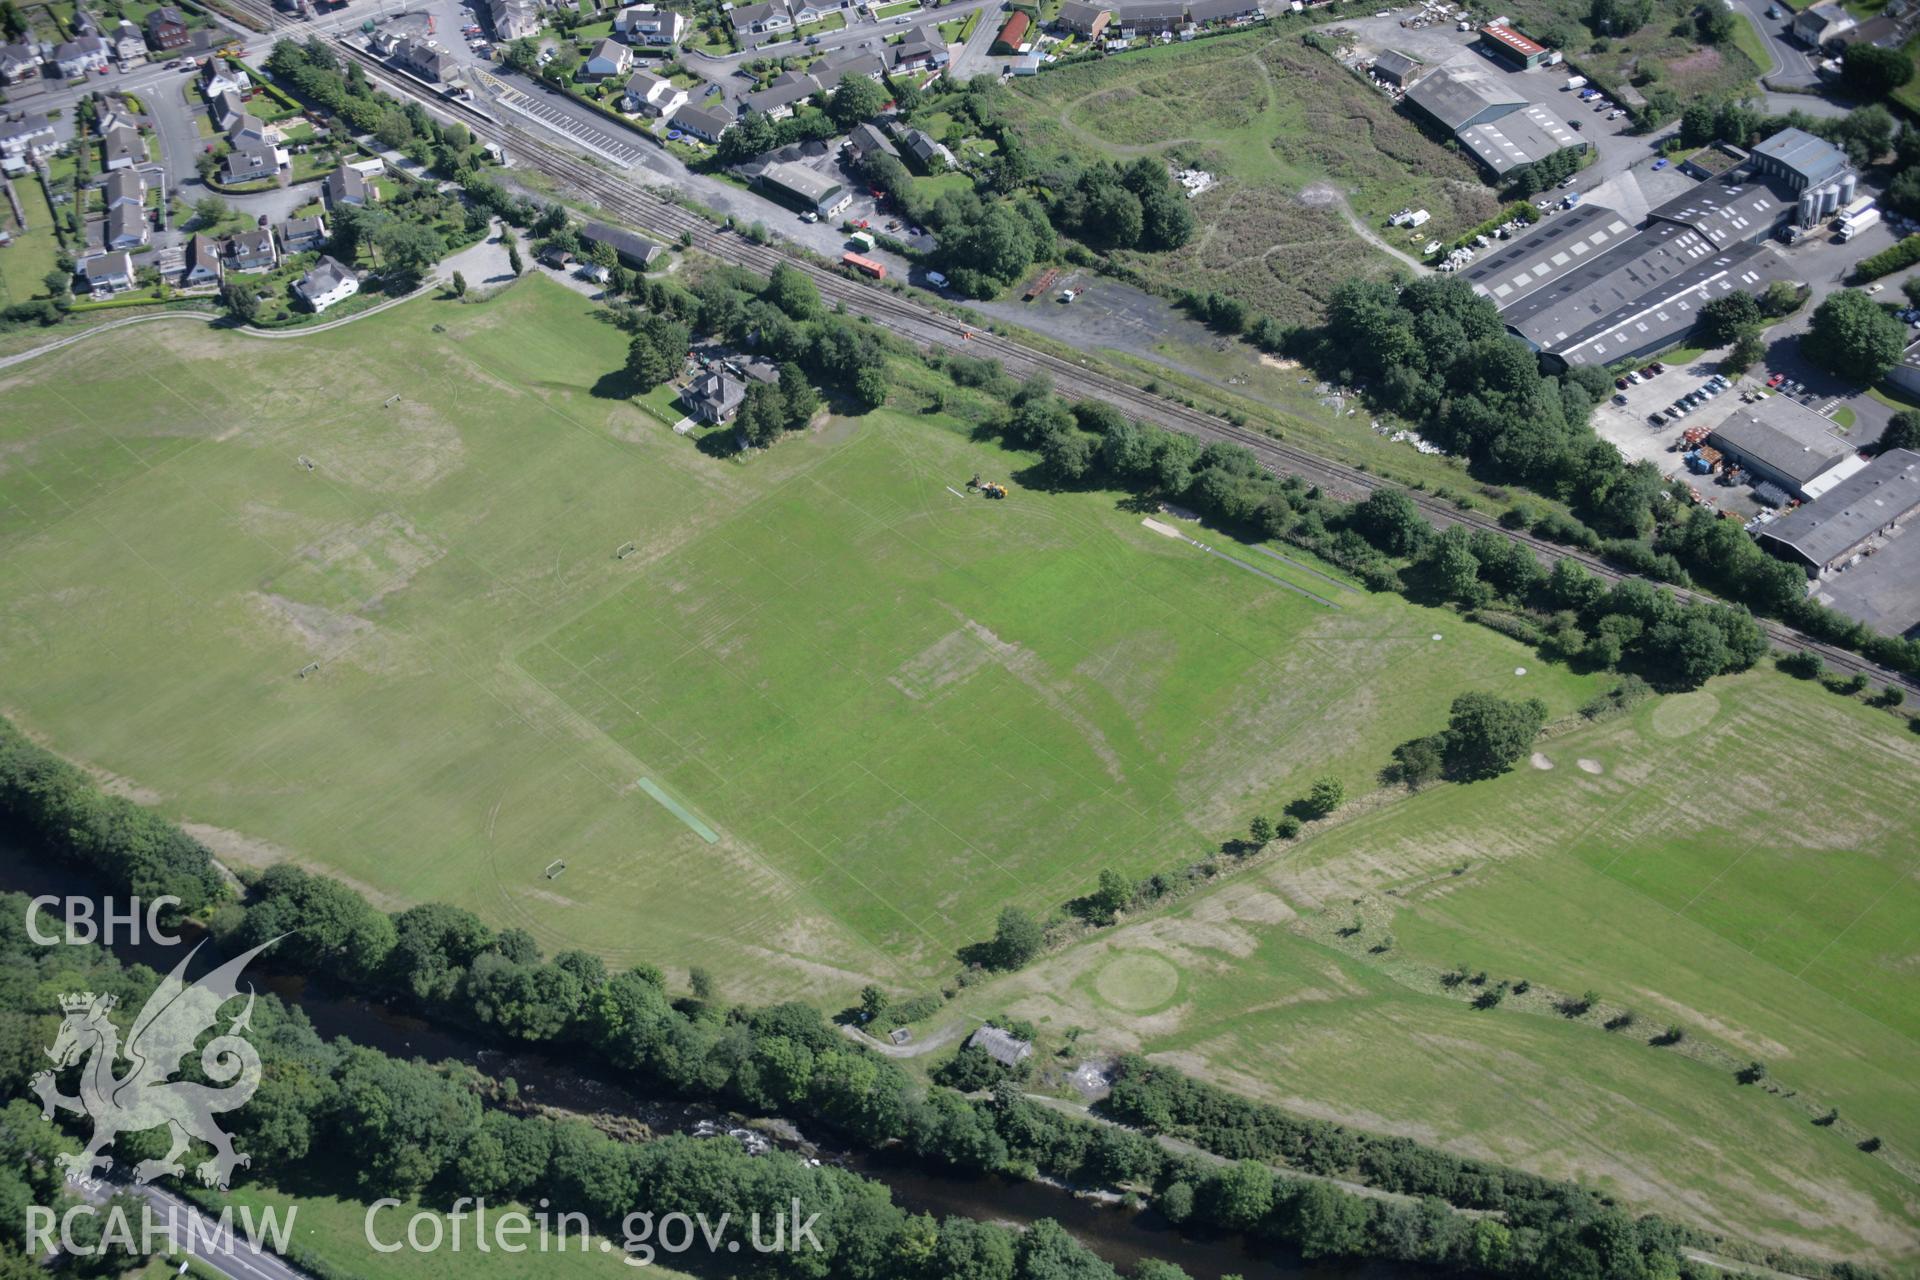 RCAHMW colour oblique aerial photograph of Llandovery from the north-west, with non-archaeological parchmarks on playing fields showing former river channels and pitches Taken on 02 September 2005 by Toby Driver